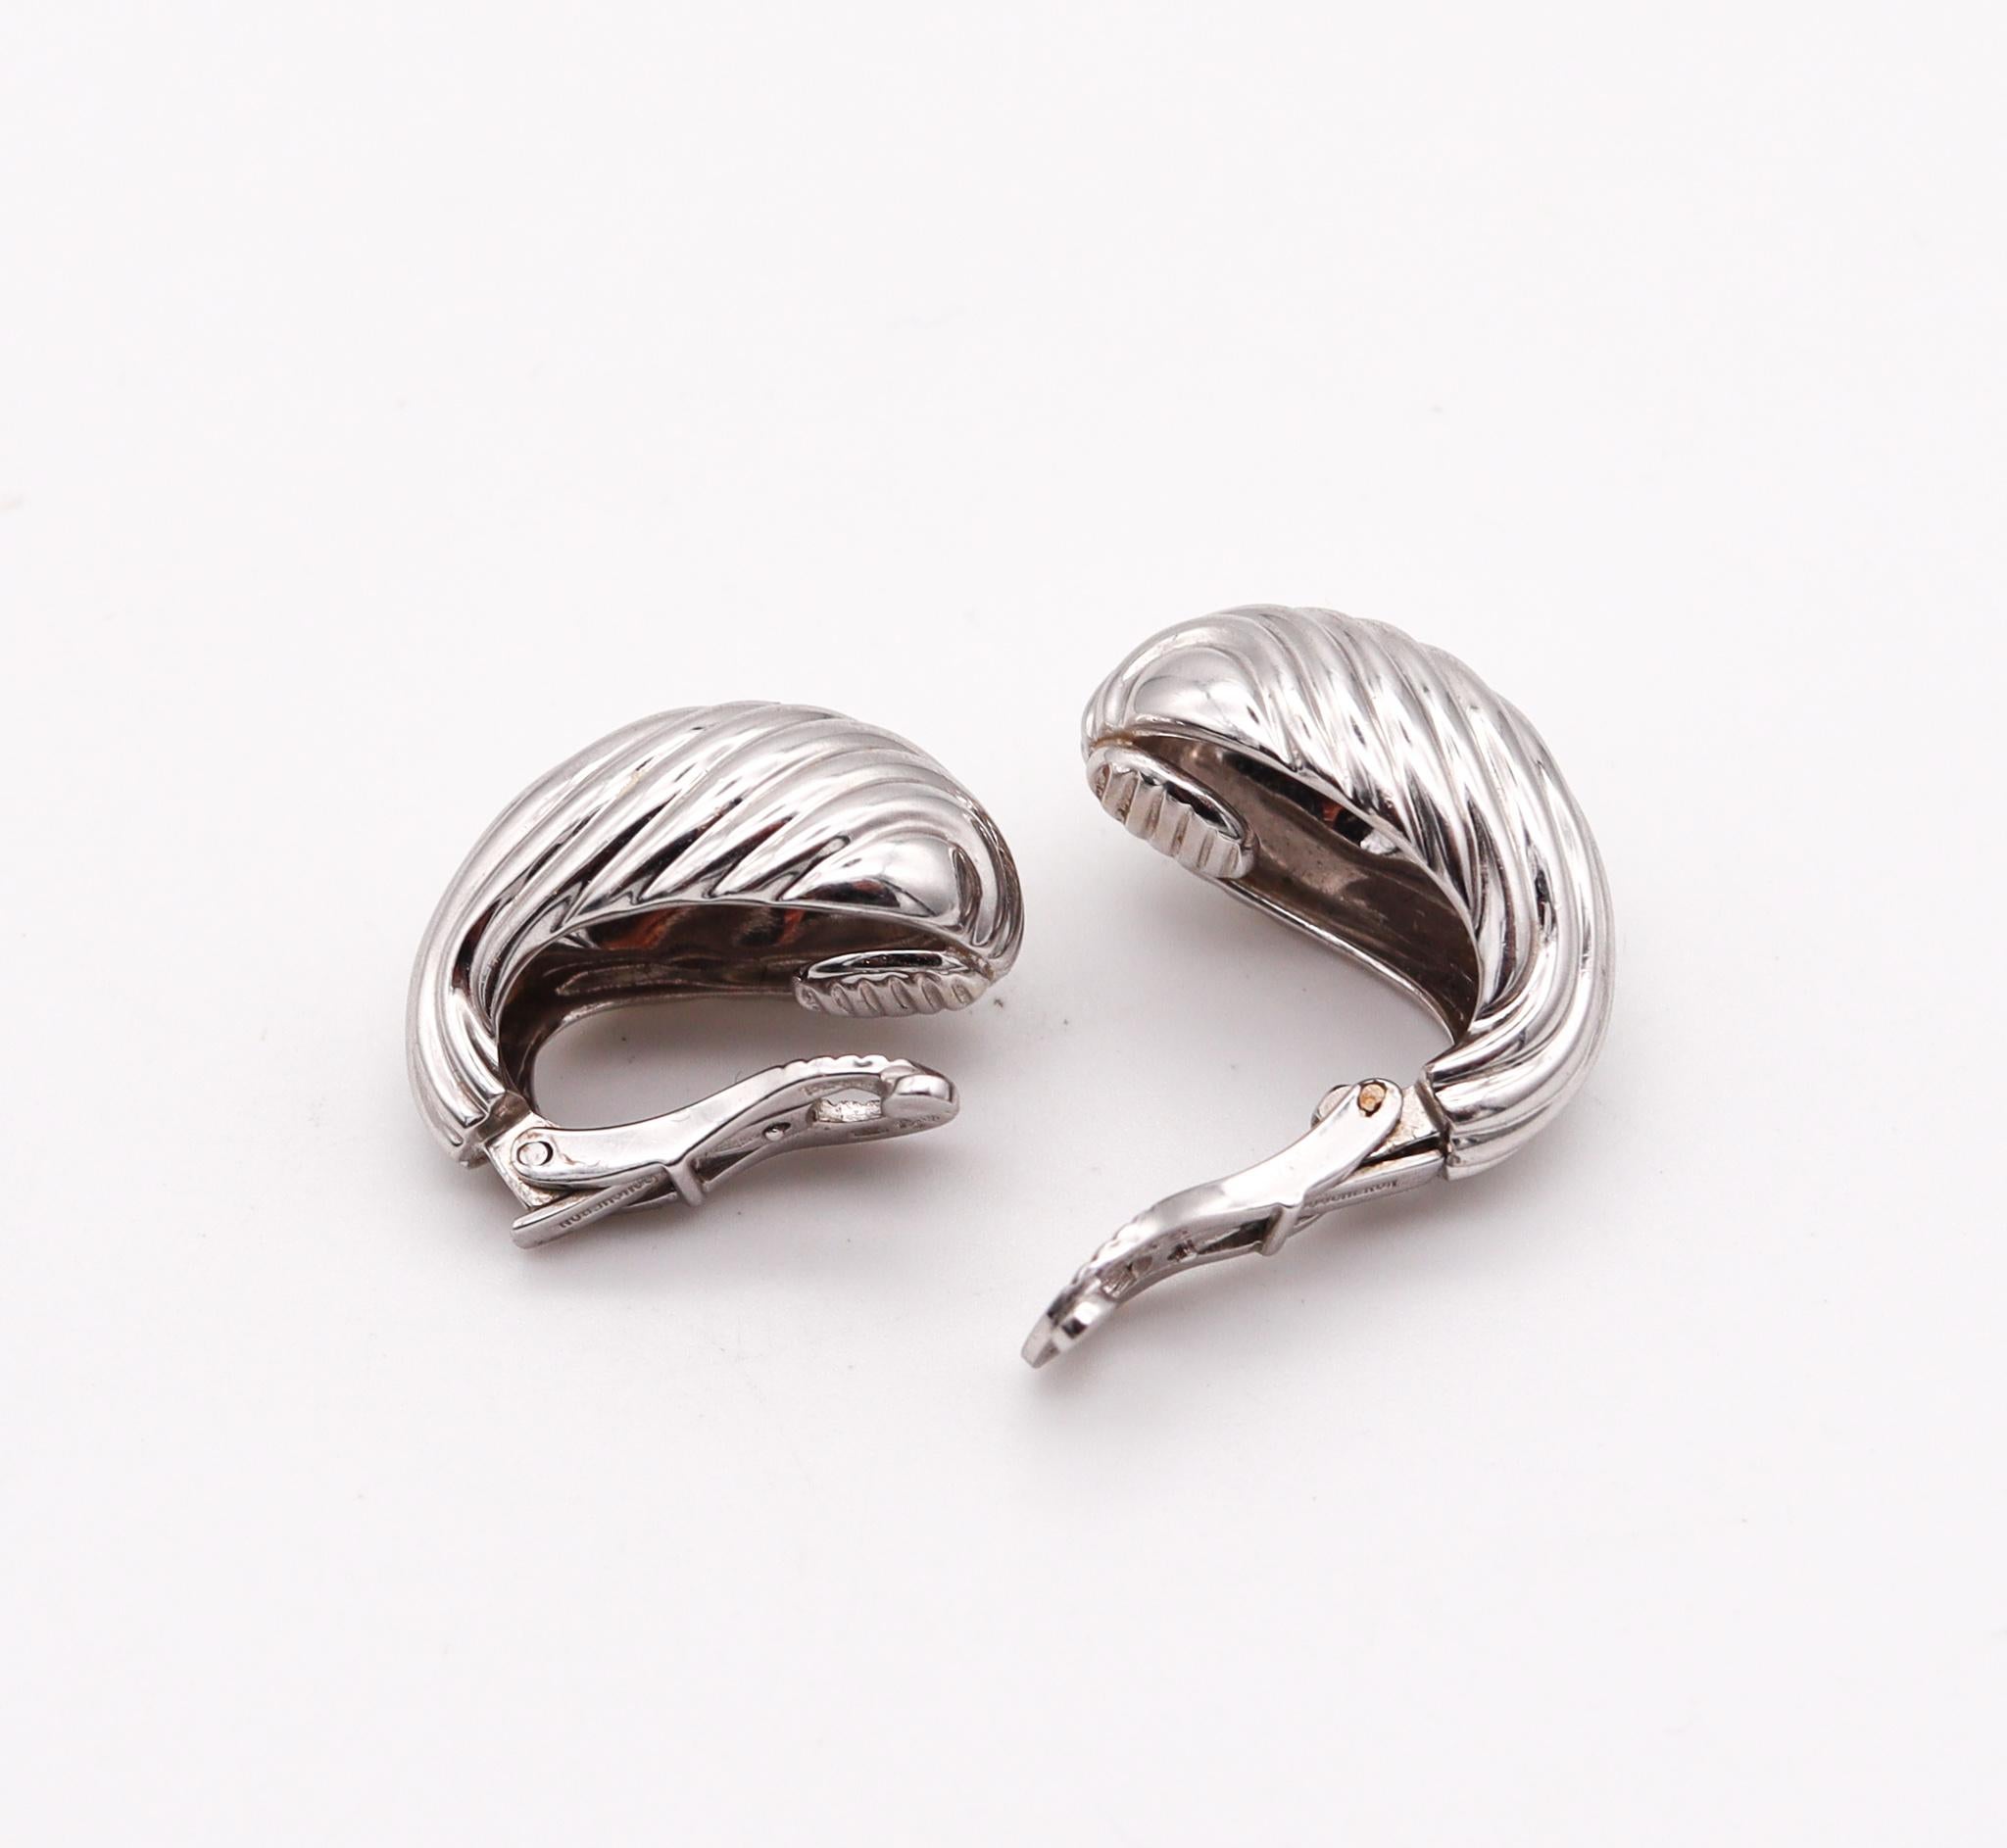 Modernist Boucheron Paris Fluted Clips on Earrings in Solid 18kt White Gold For Sale